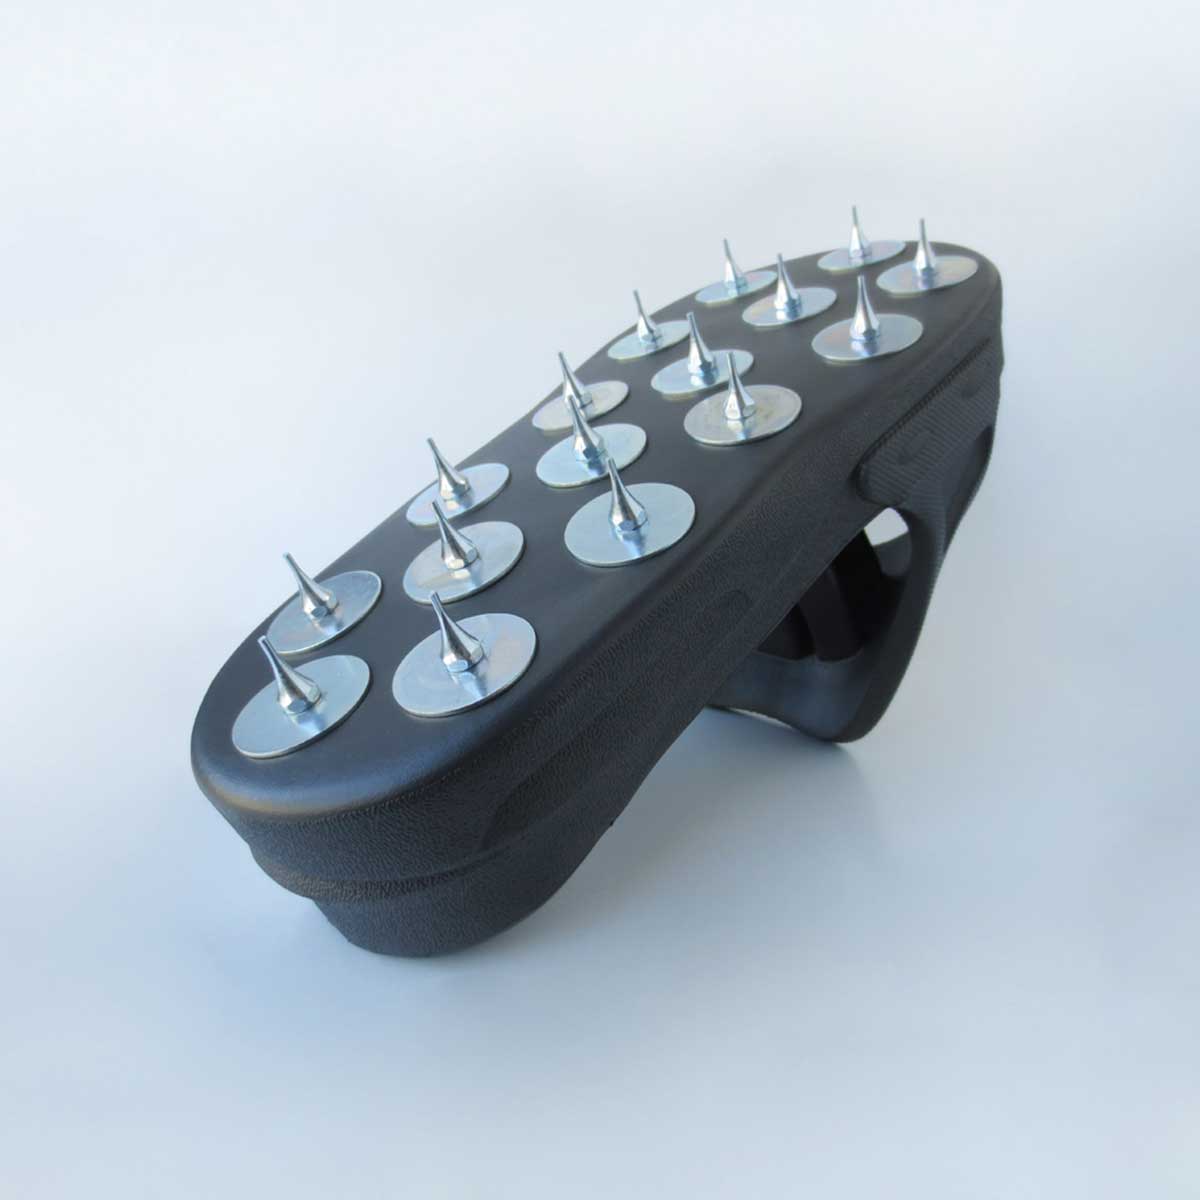 Shoe-In Spiked Shoes for Gunite Resinous Epoxy Coatings Large